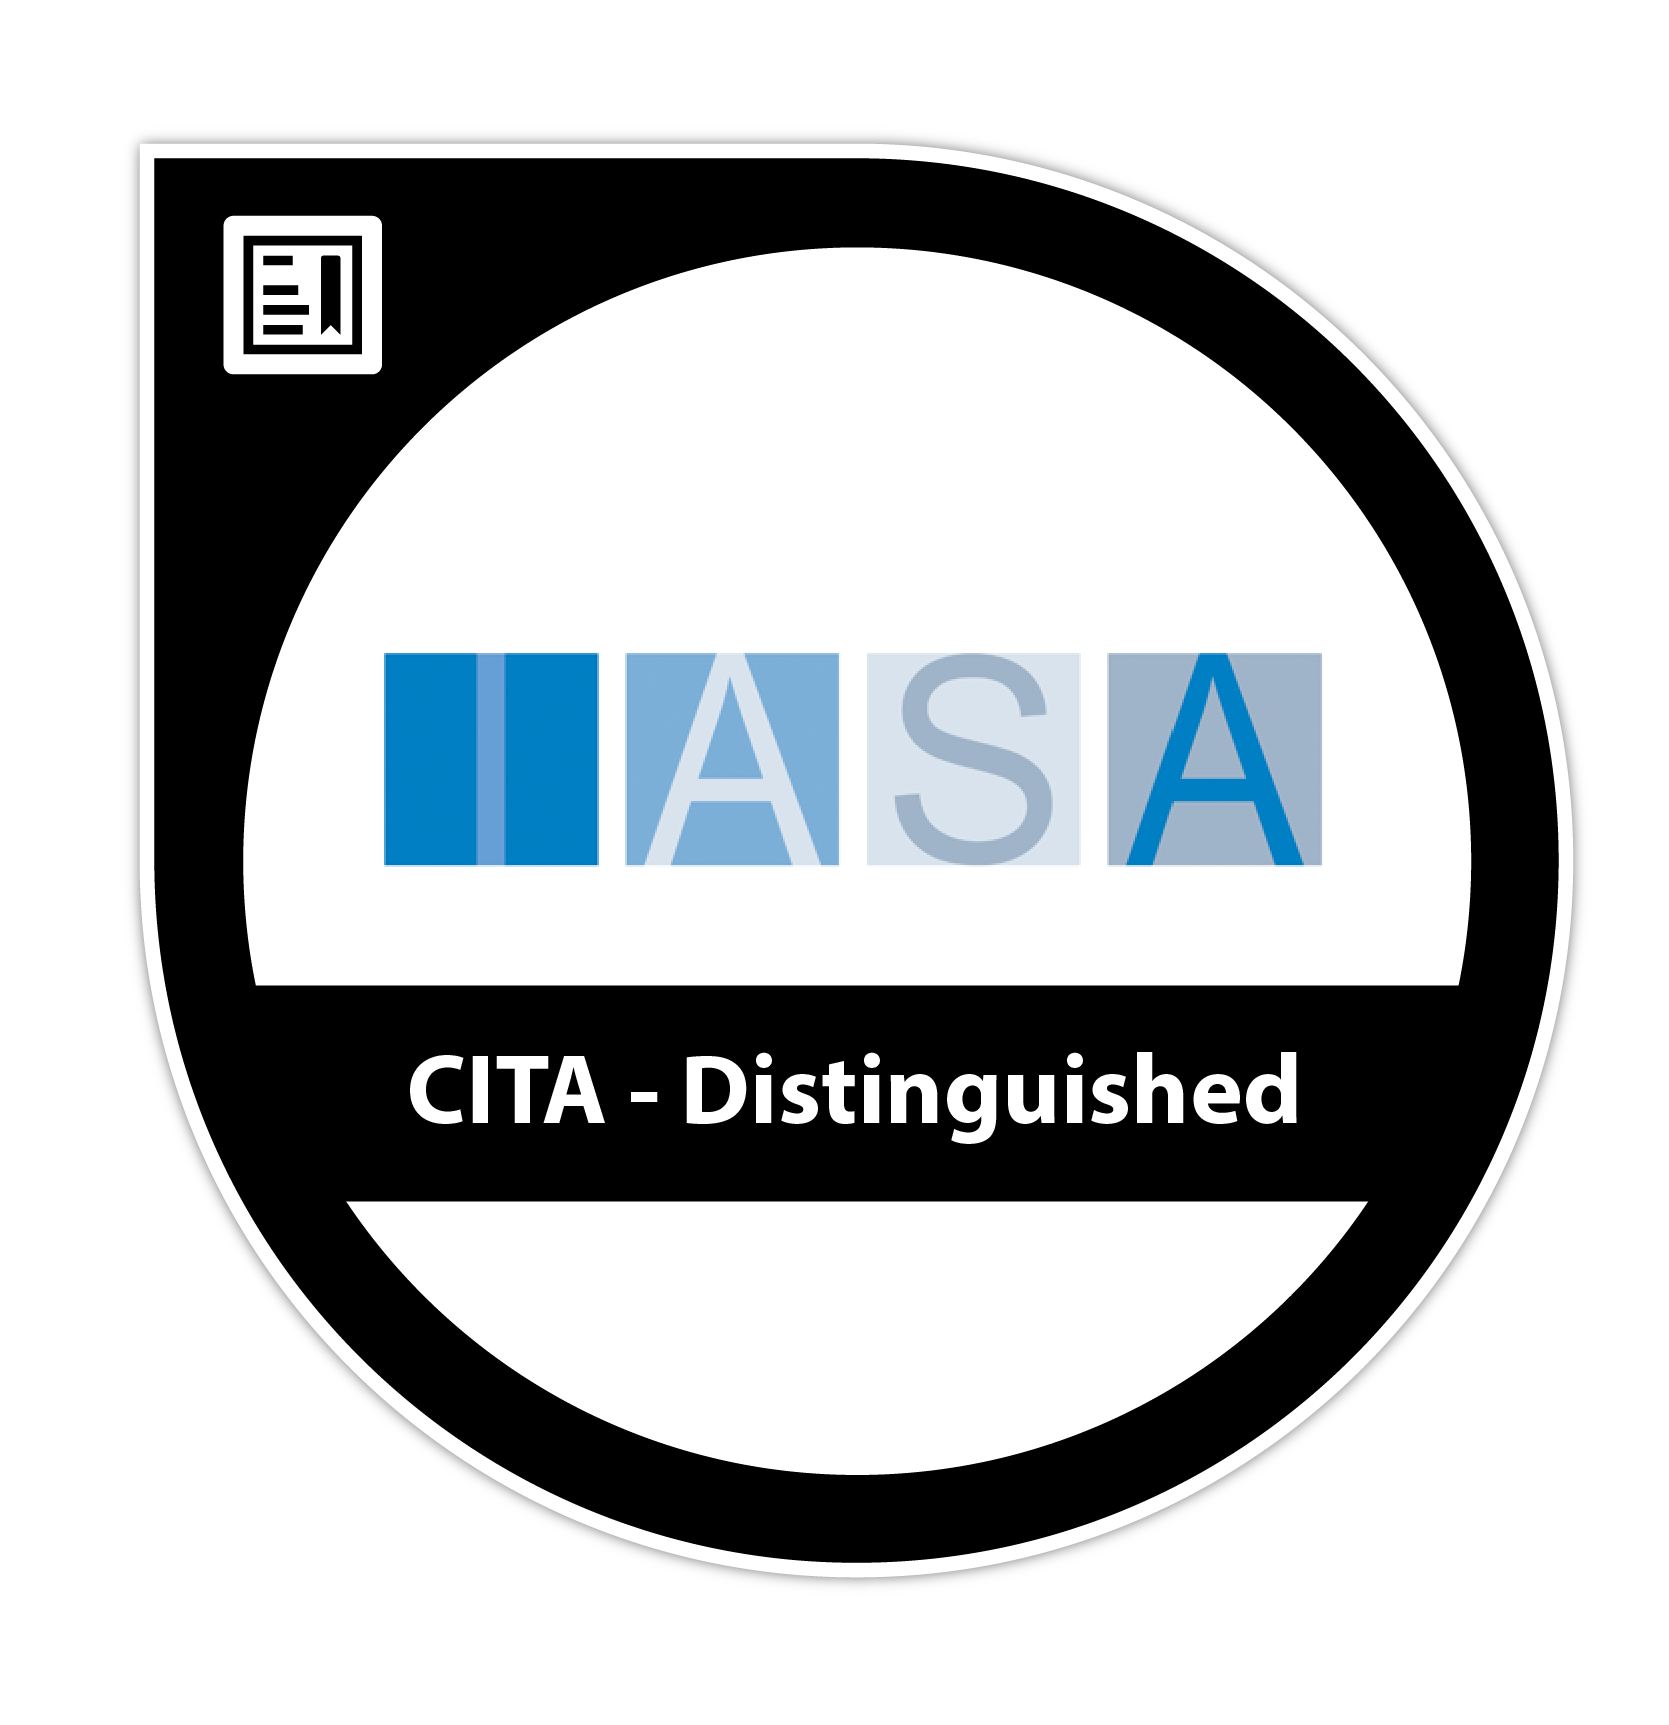 Certified IT Architect - Distinguished